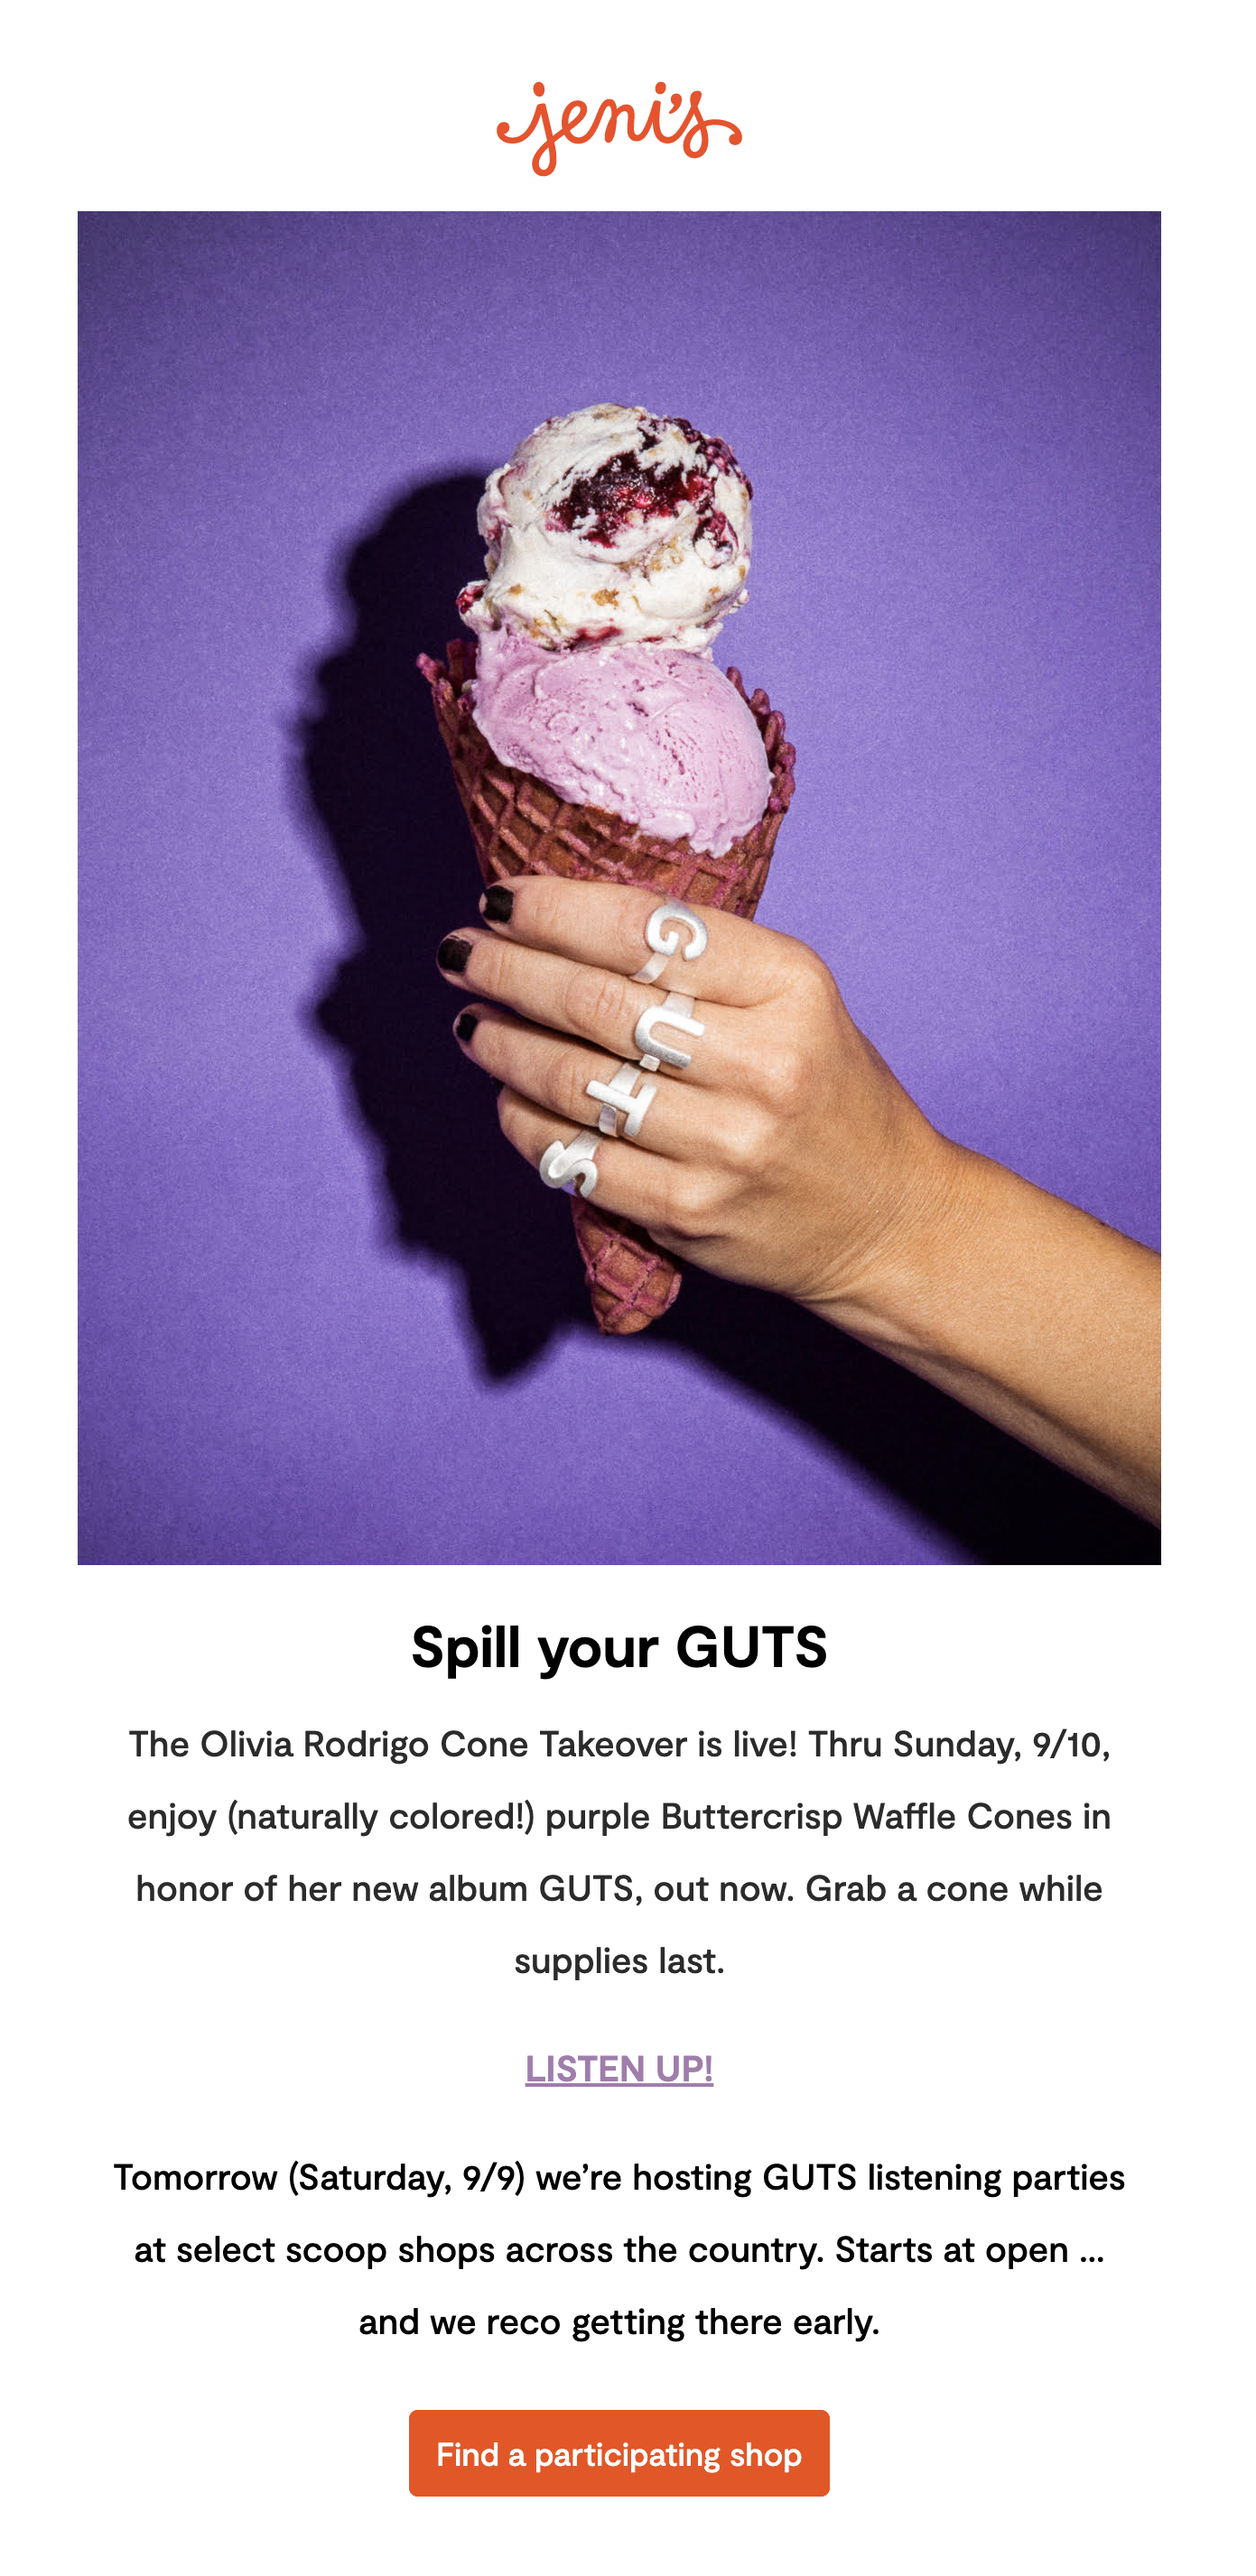 Promotional email from Jeni's showing a hand holding an ice cream cone with the text Spill your guts below it.